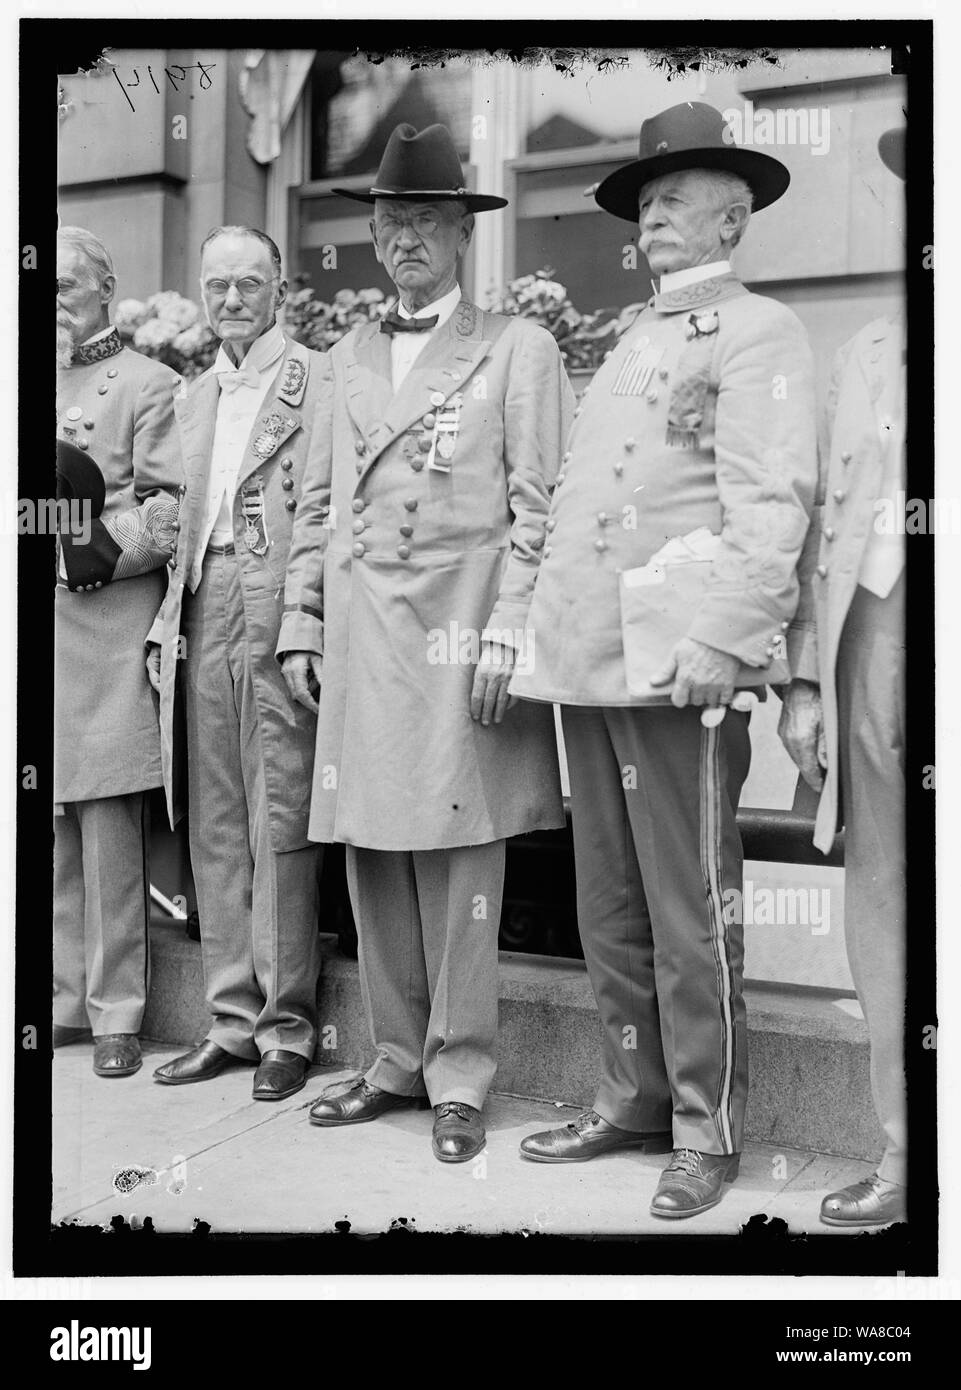 CONFEDERATE REUNION. GEN. HARRISON OF MISSISSIPPI, COMMANDER IN CHIEF, WITH GENERALS MICKEY AND DINKINS Stock Photo